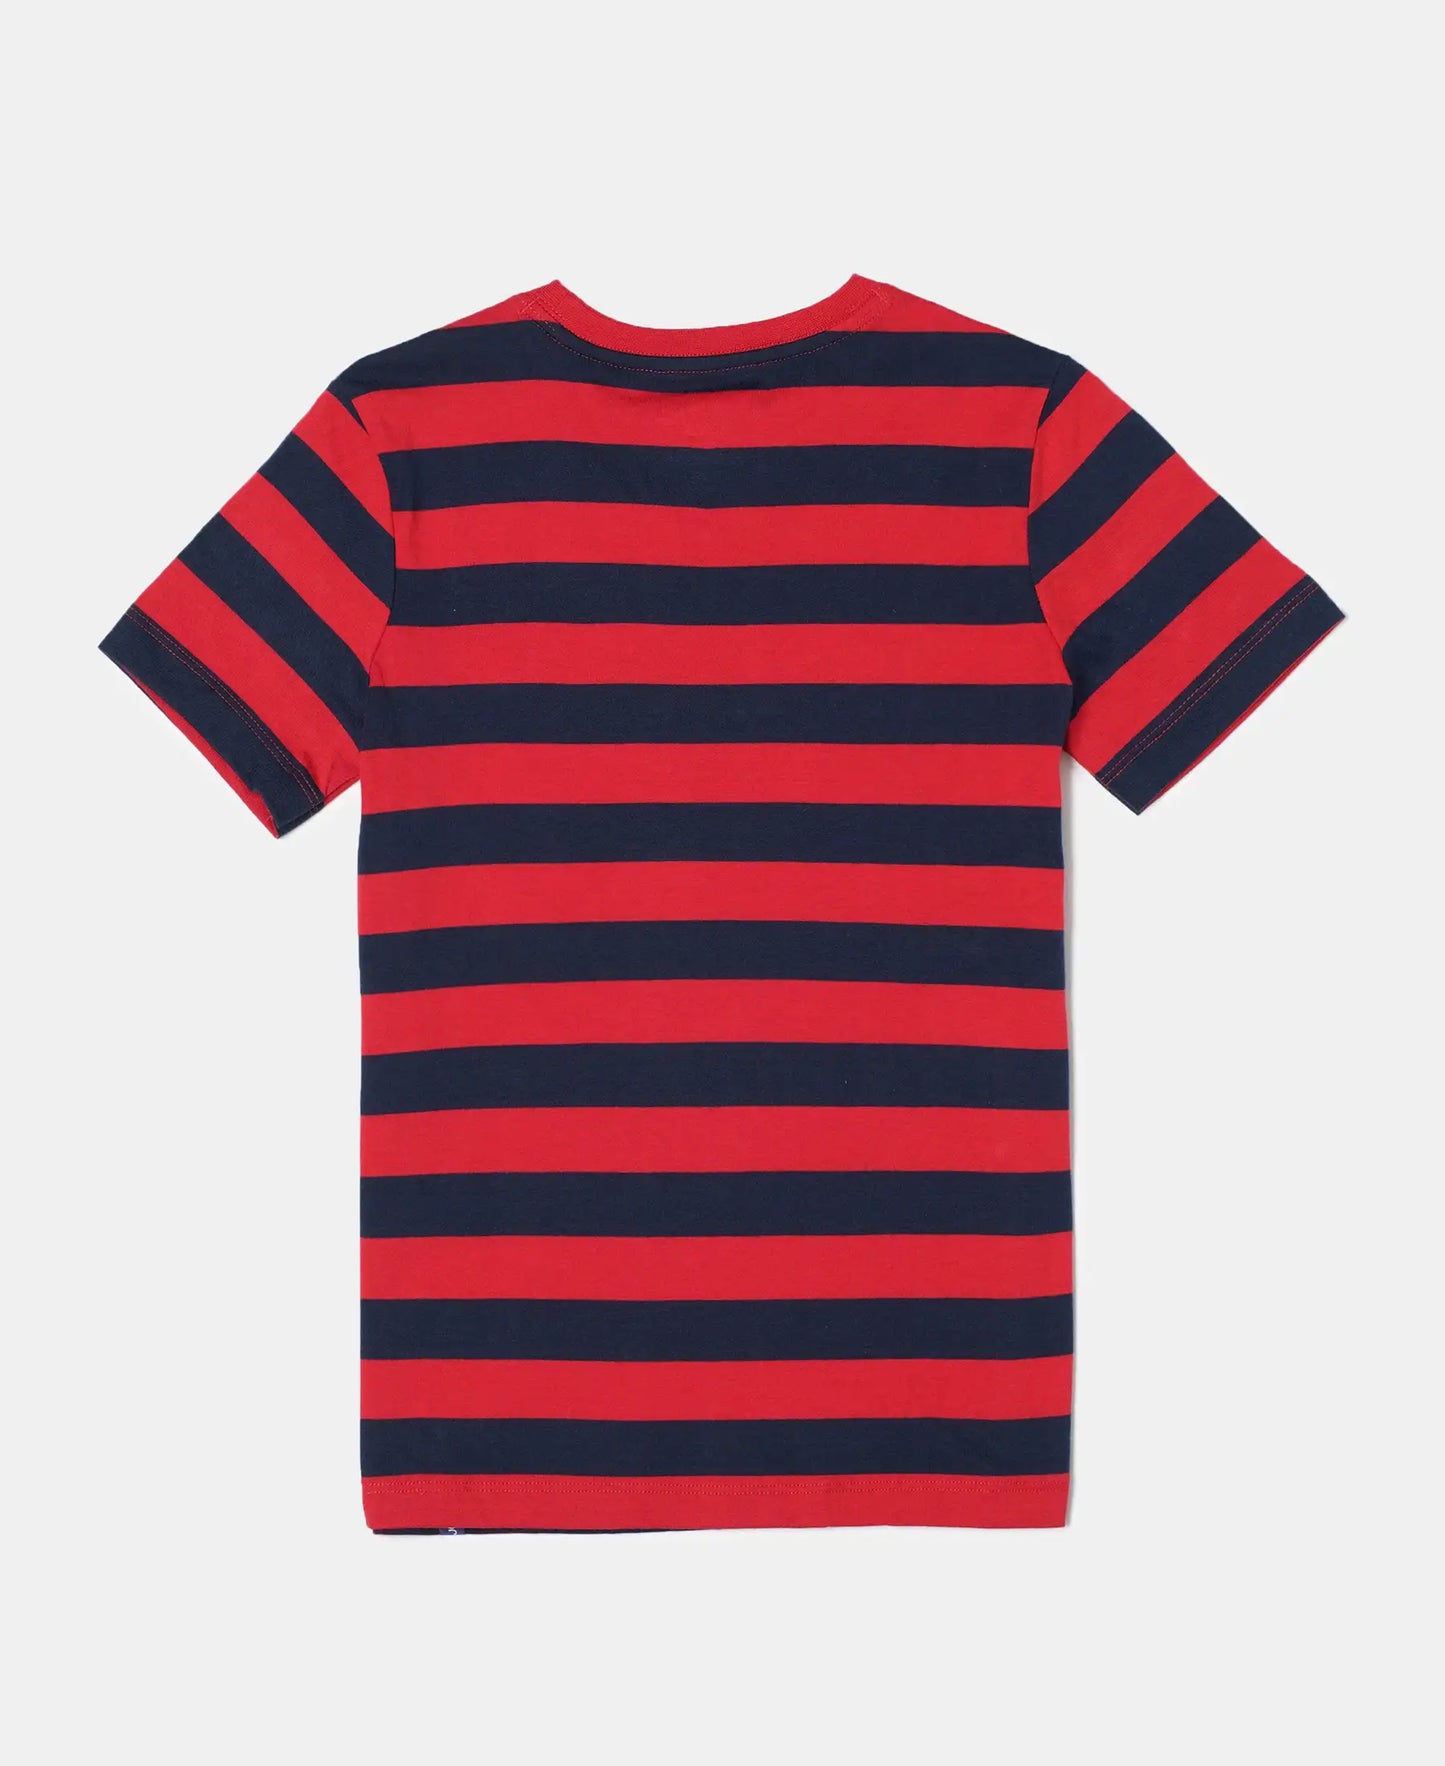 Super Combed Cotton Striped Half Sleeve T-Shirt - Wordly Red & Navy-2